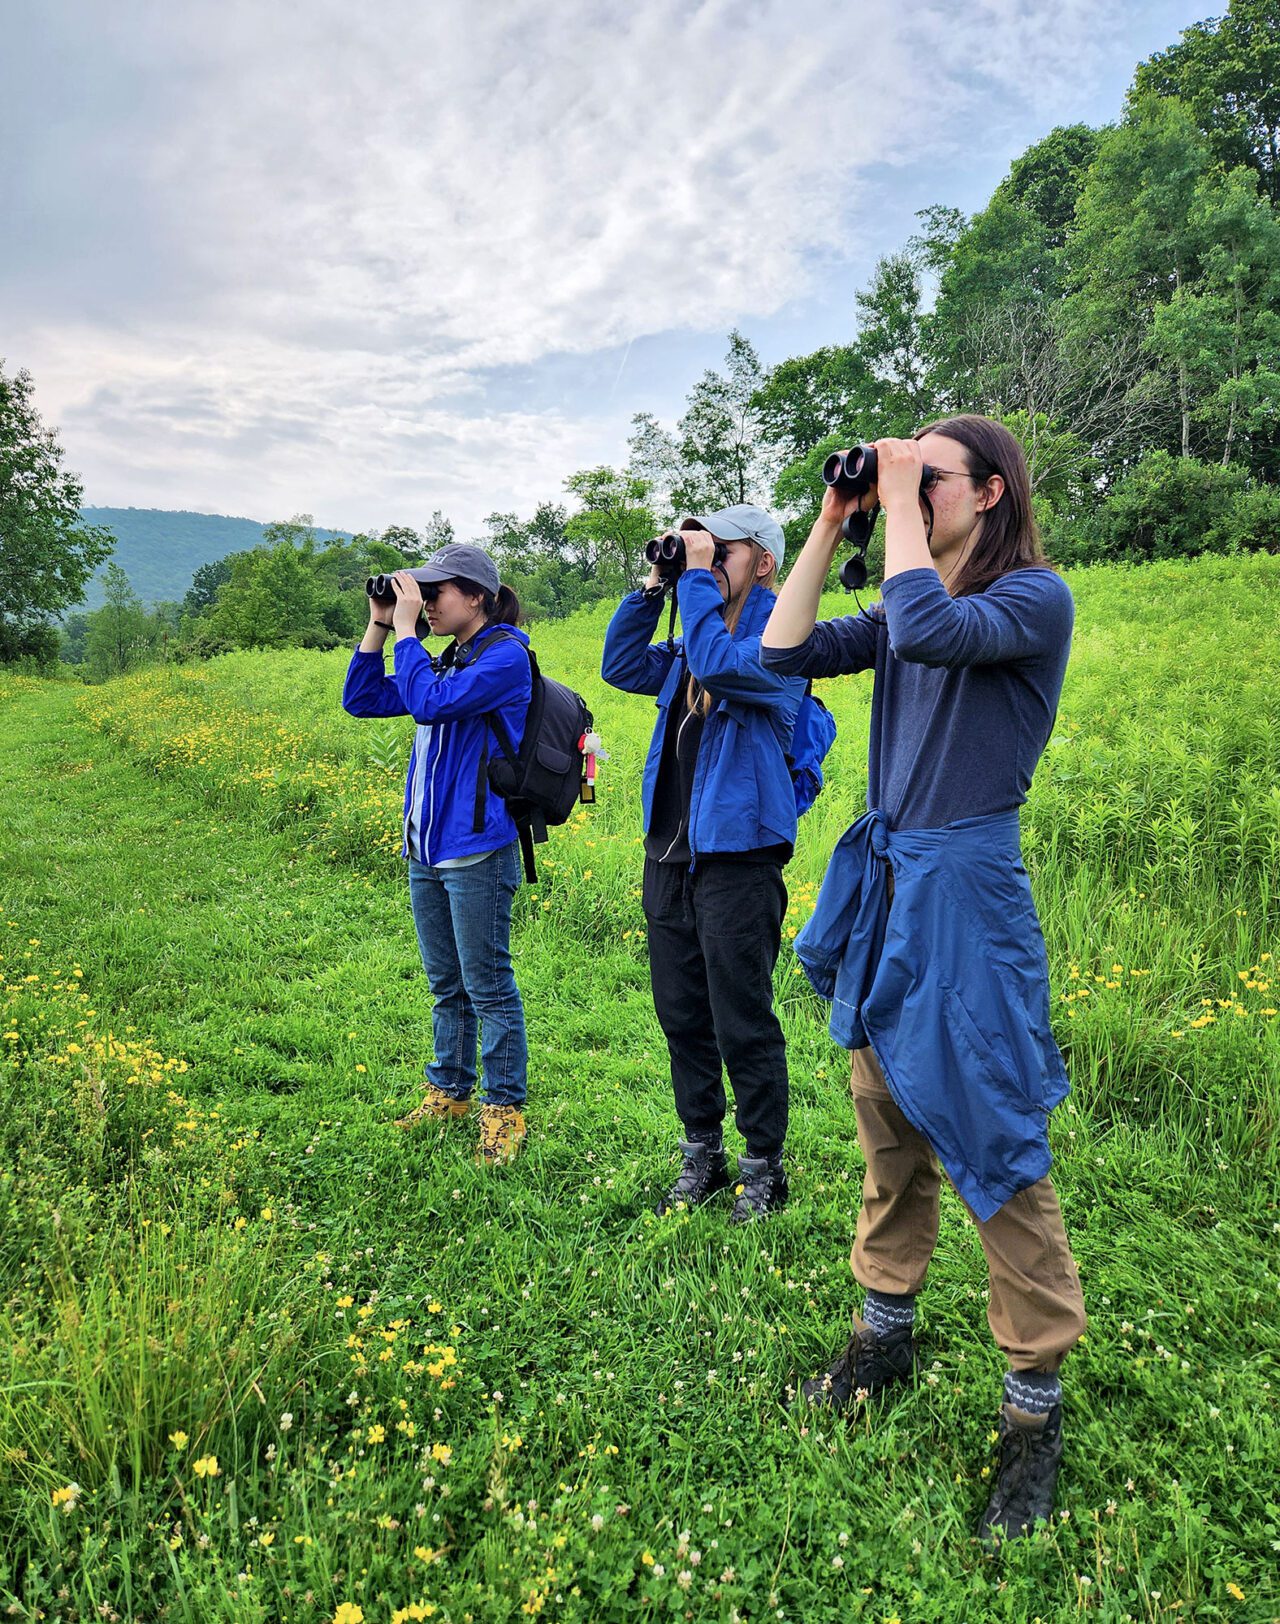 A Third of American Adults Are Birdwatchers, According to Nationwide Survey